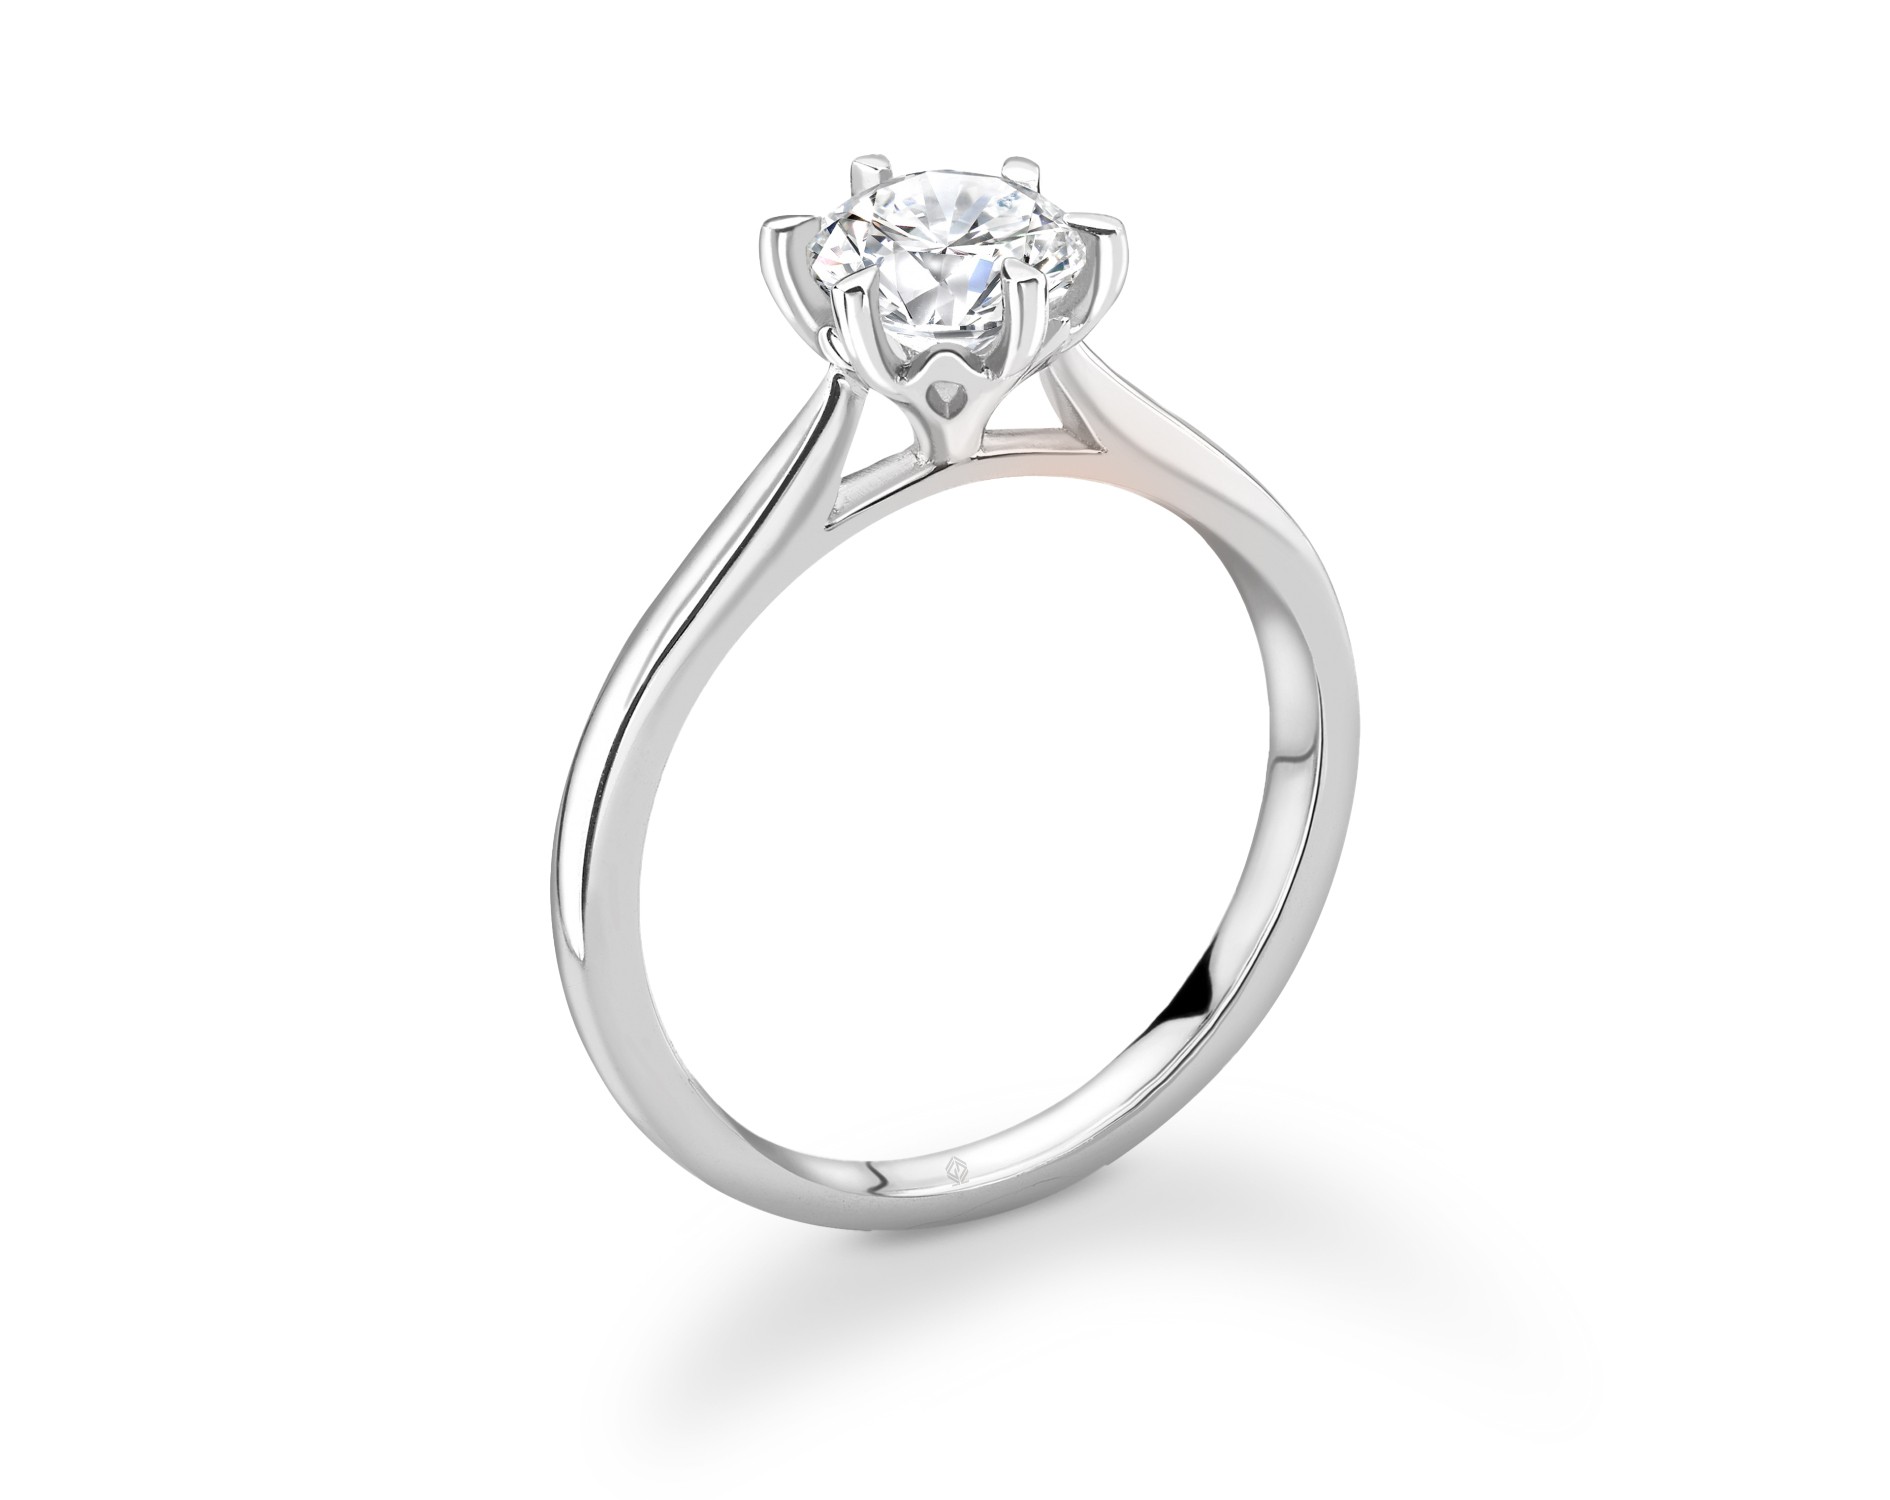 18K WHITE GOLD ROUND CUT 6 PRONGS SOLITAIRE DIAMOND ENGAGEMENT RING